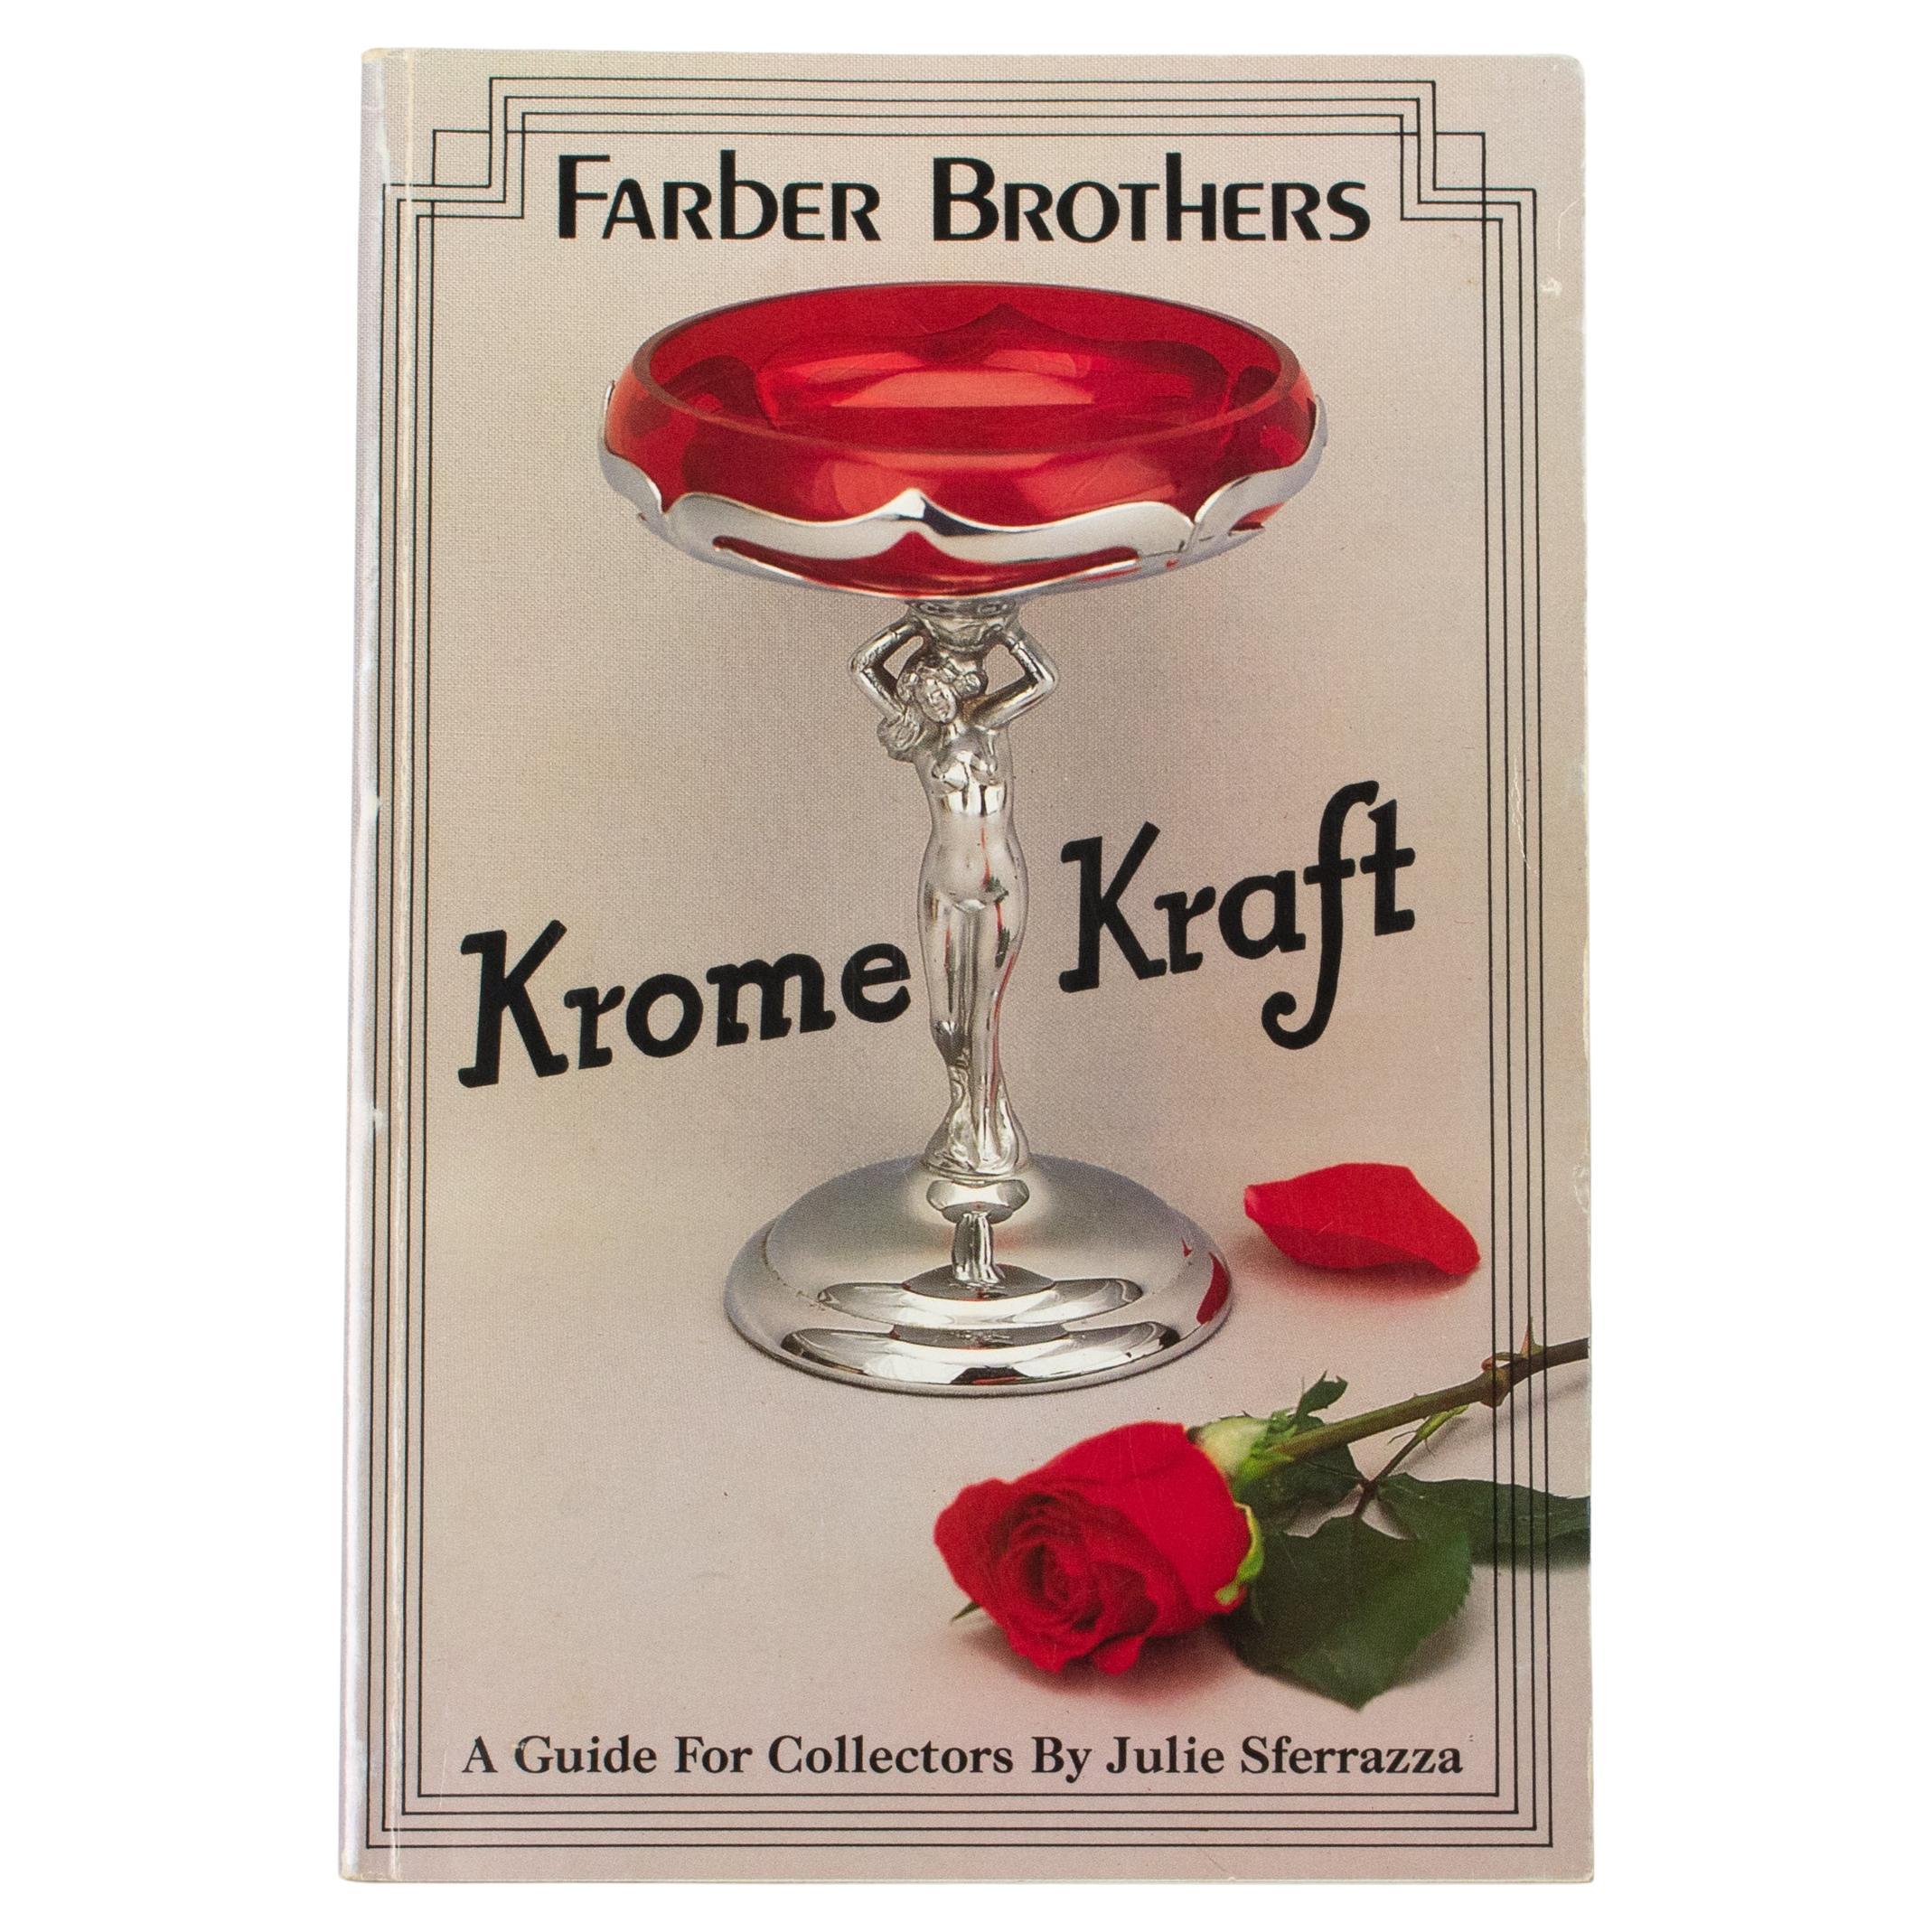 Farber Brothers Krome Kraft, A Guide for Collectors Book by Julie Sferrazza 1988 For Sale